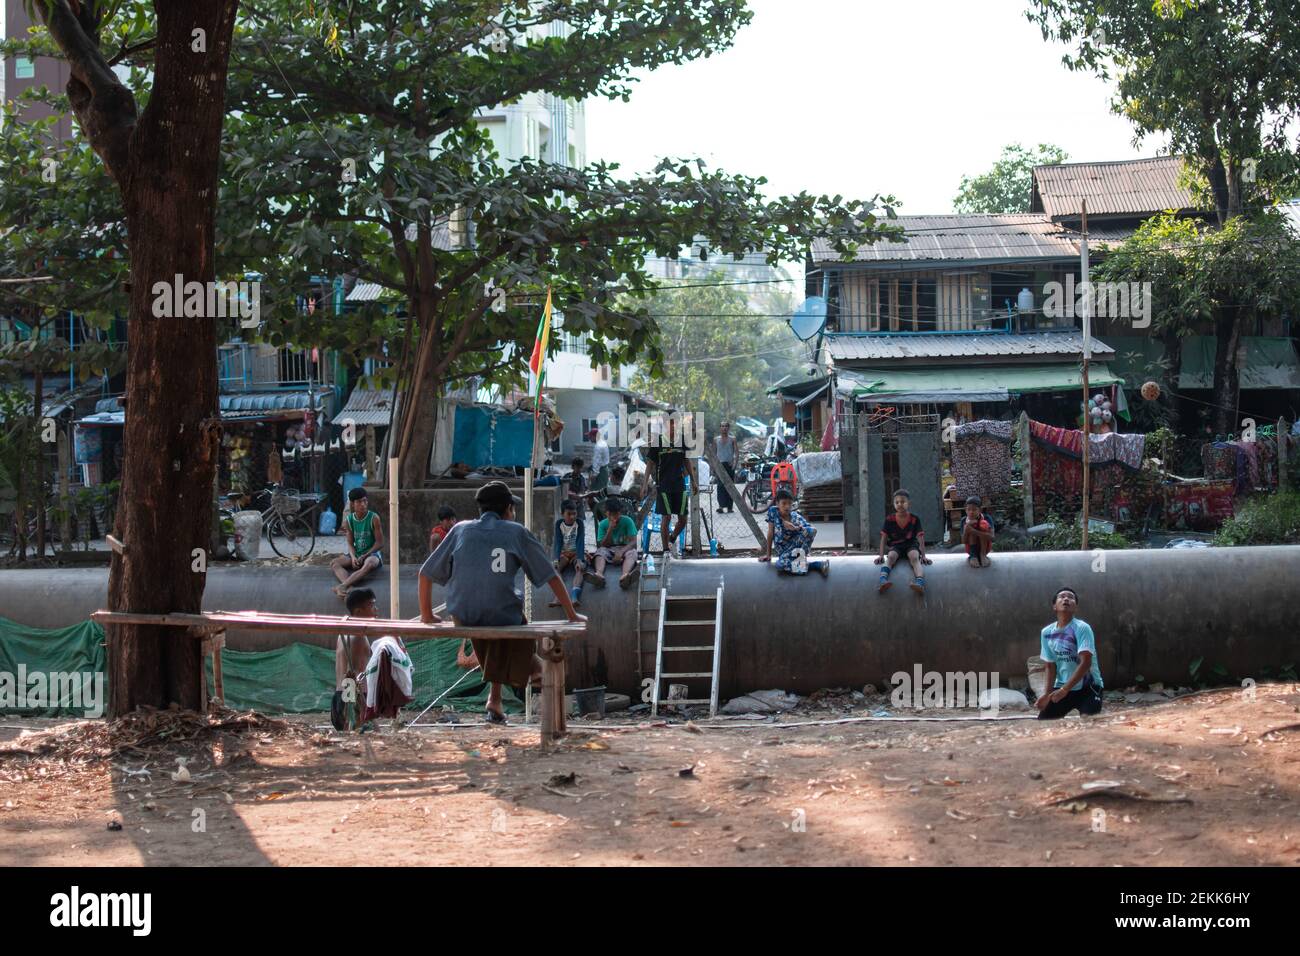 YANGON, MYANMAR - DECEMEBER 31 2019: Local people play traditional chinlone ball with spectators sitting on a pipeline in a village outside Yangon Stock Photo